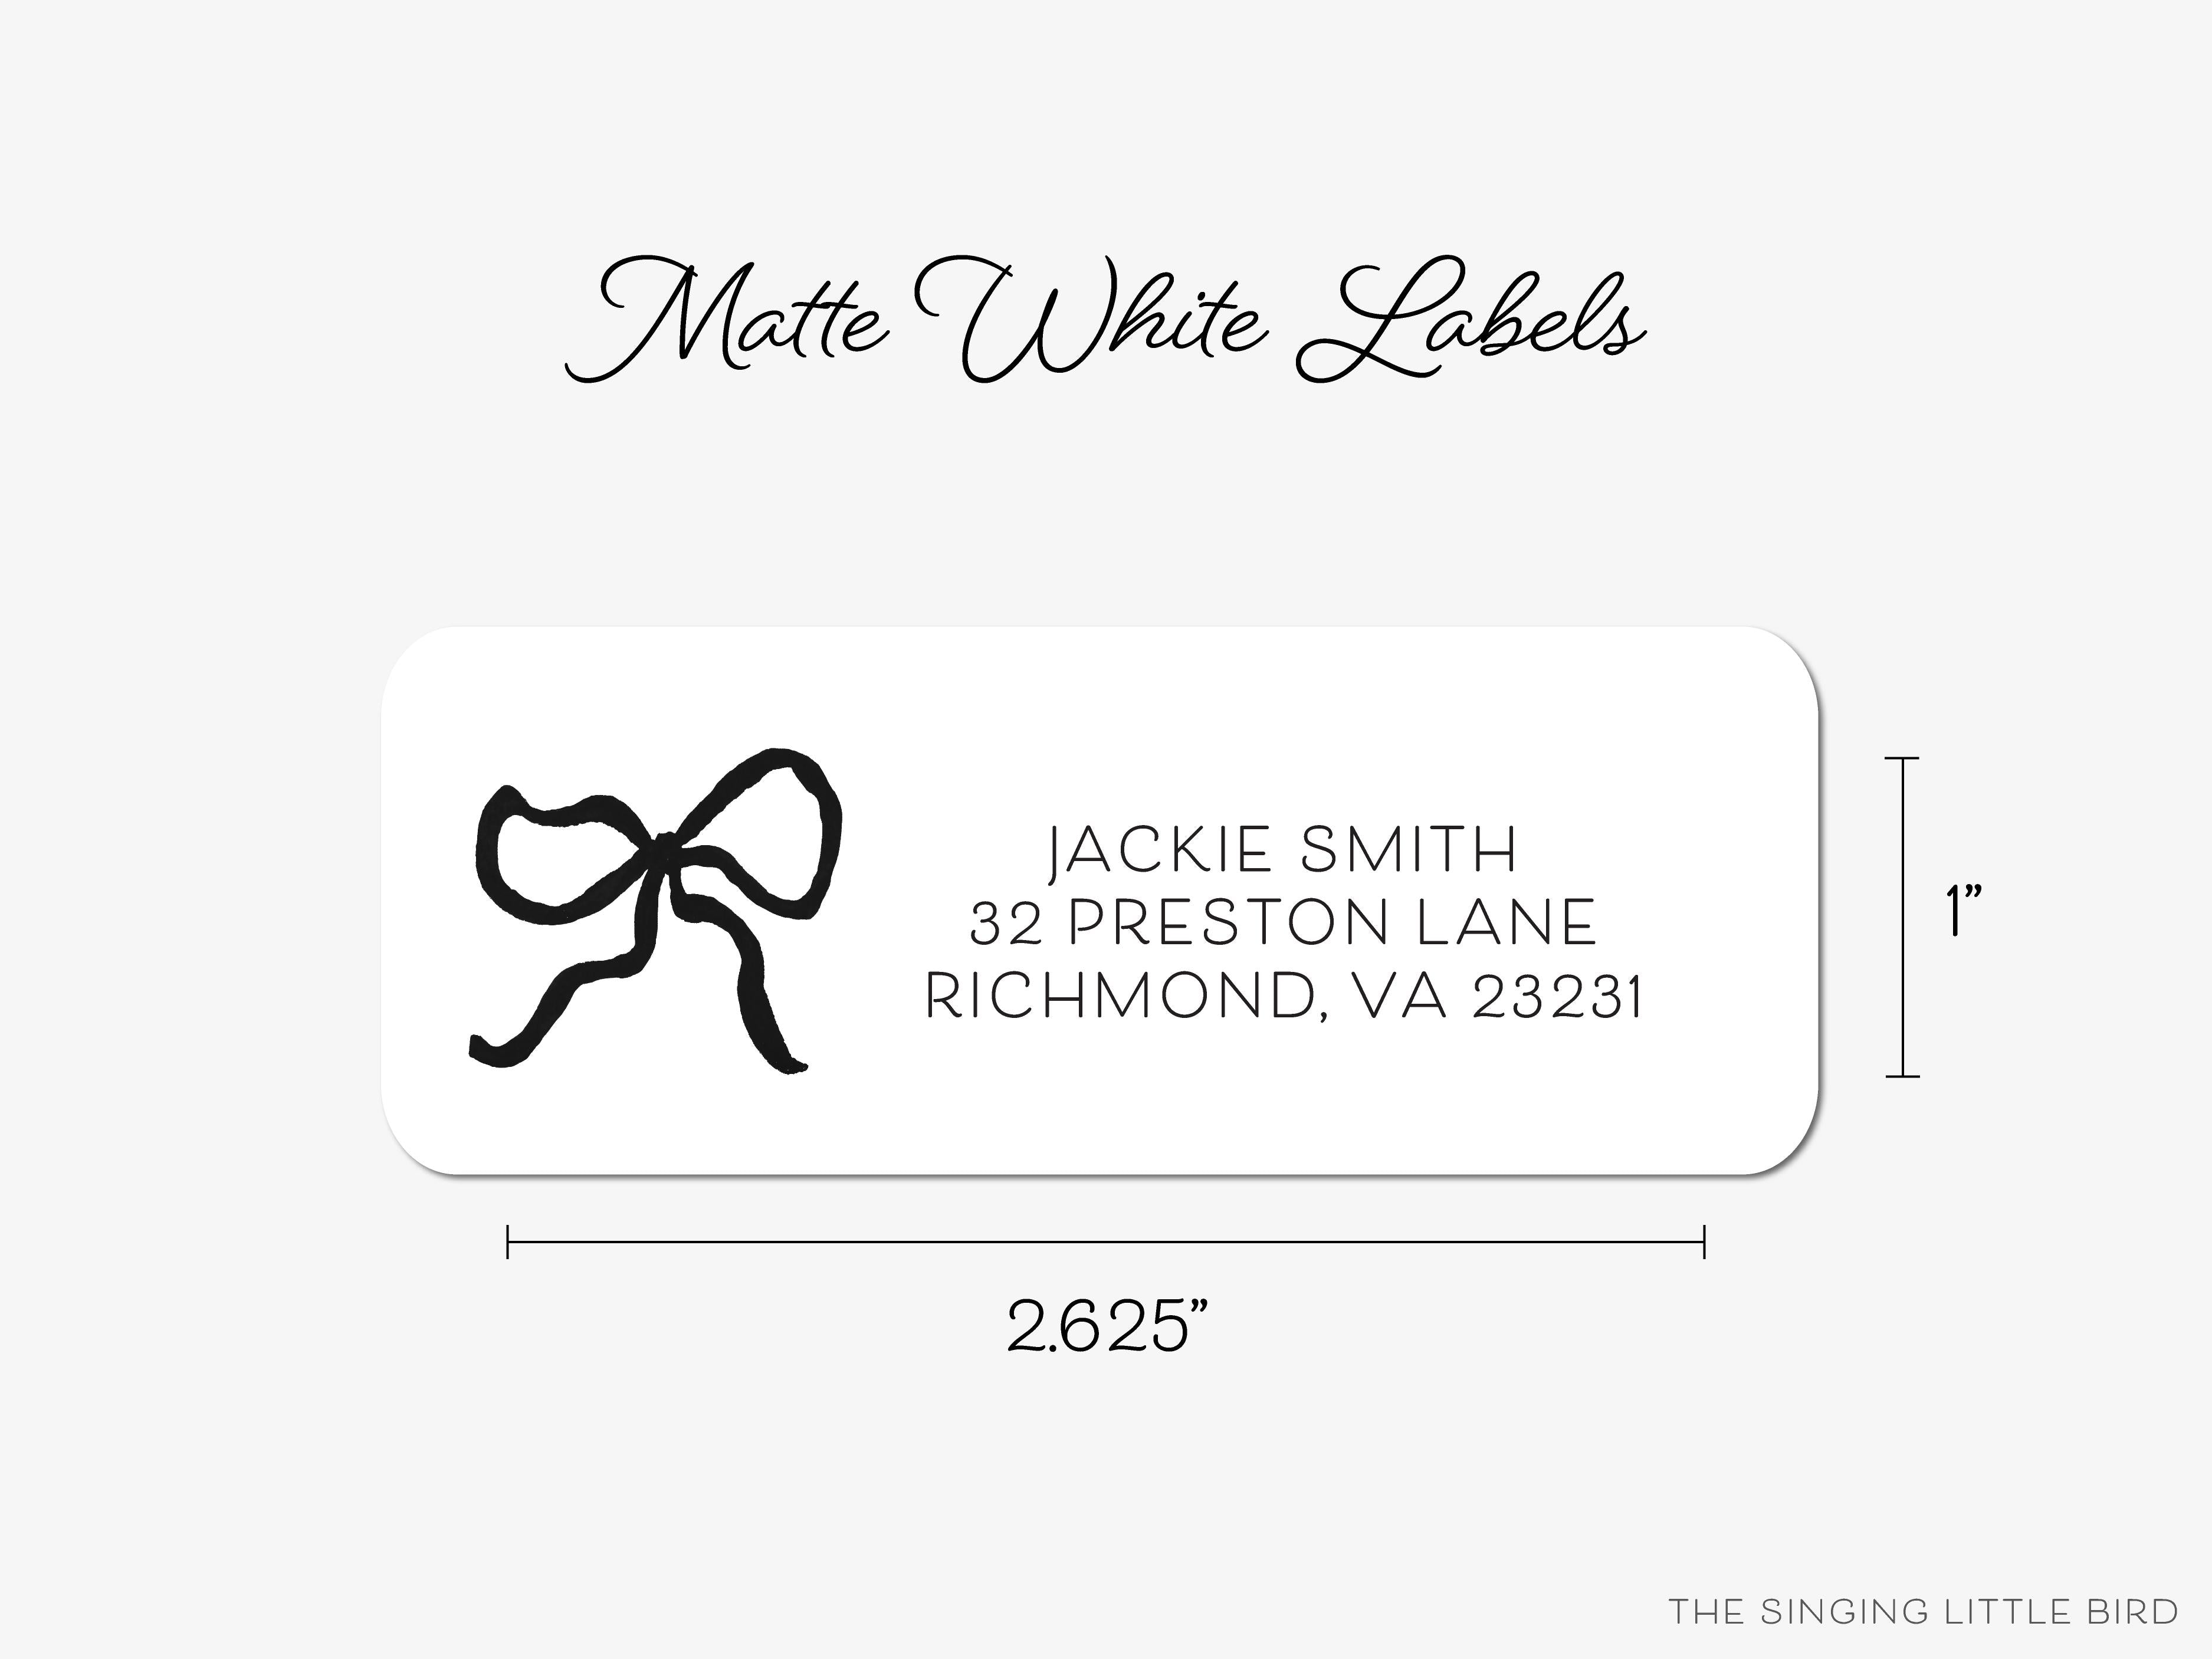 Black Bow Return Address Labels-These personalized return address labels are 2.625" x 1" and feature our hand-painted watercolor bow, printed in the USA on beautiful matte finish labels. These make great gifts for yourself or the bow lover.-The Singing Little Bird